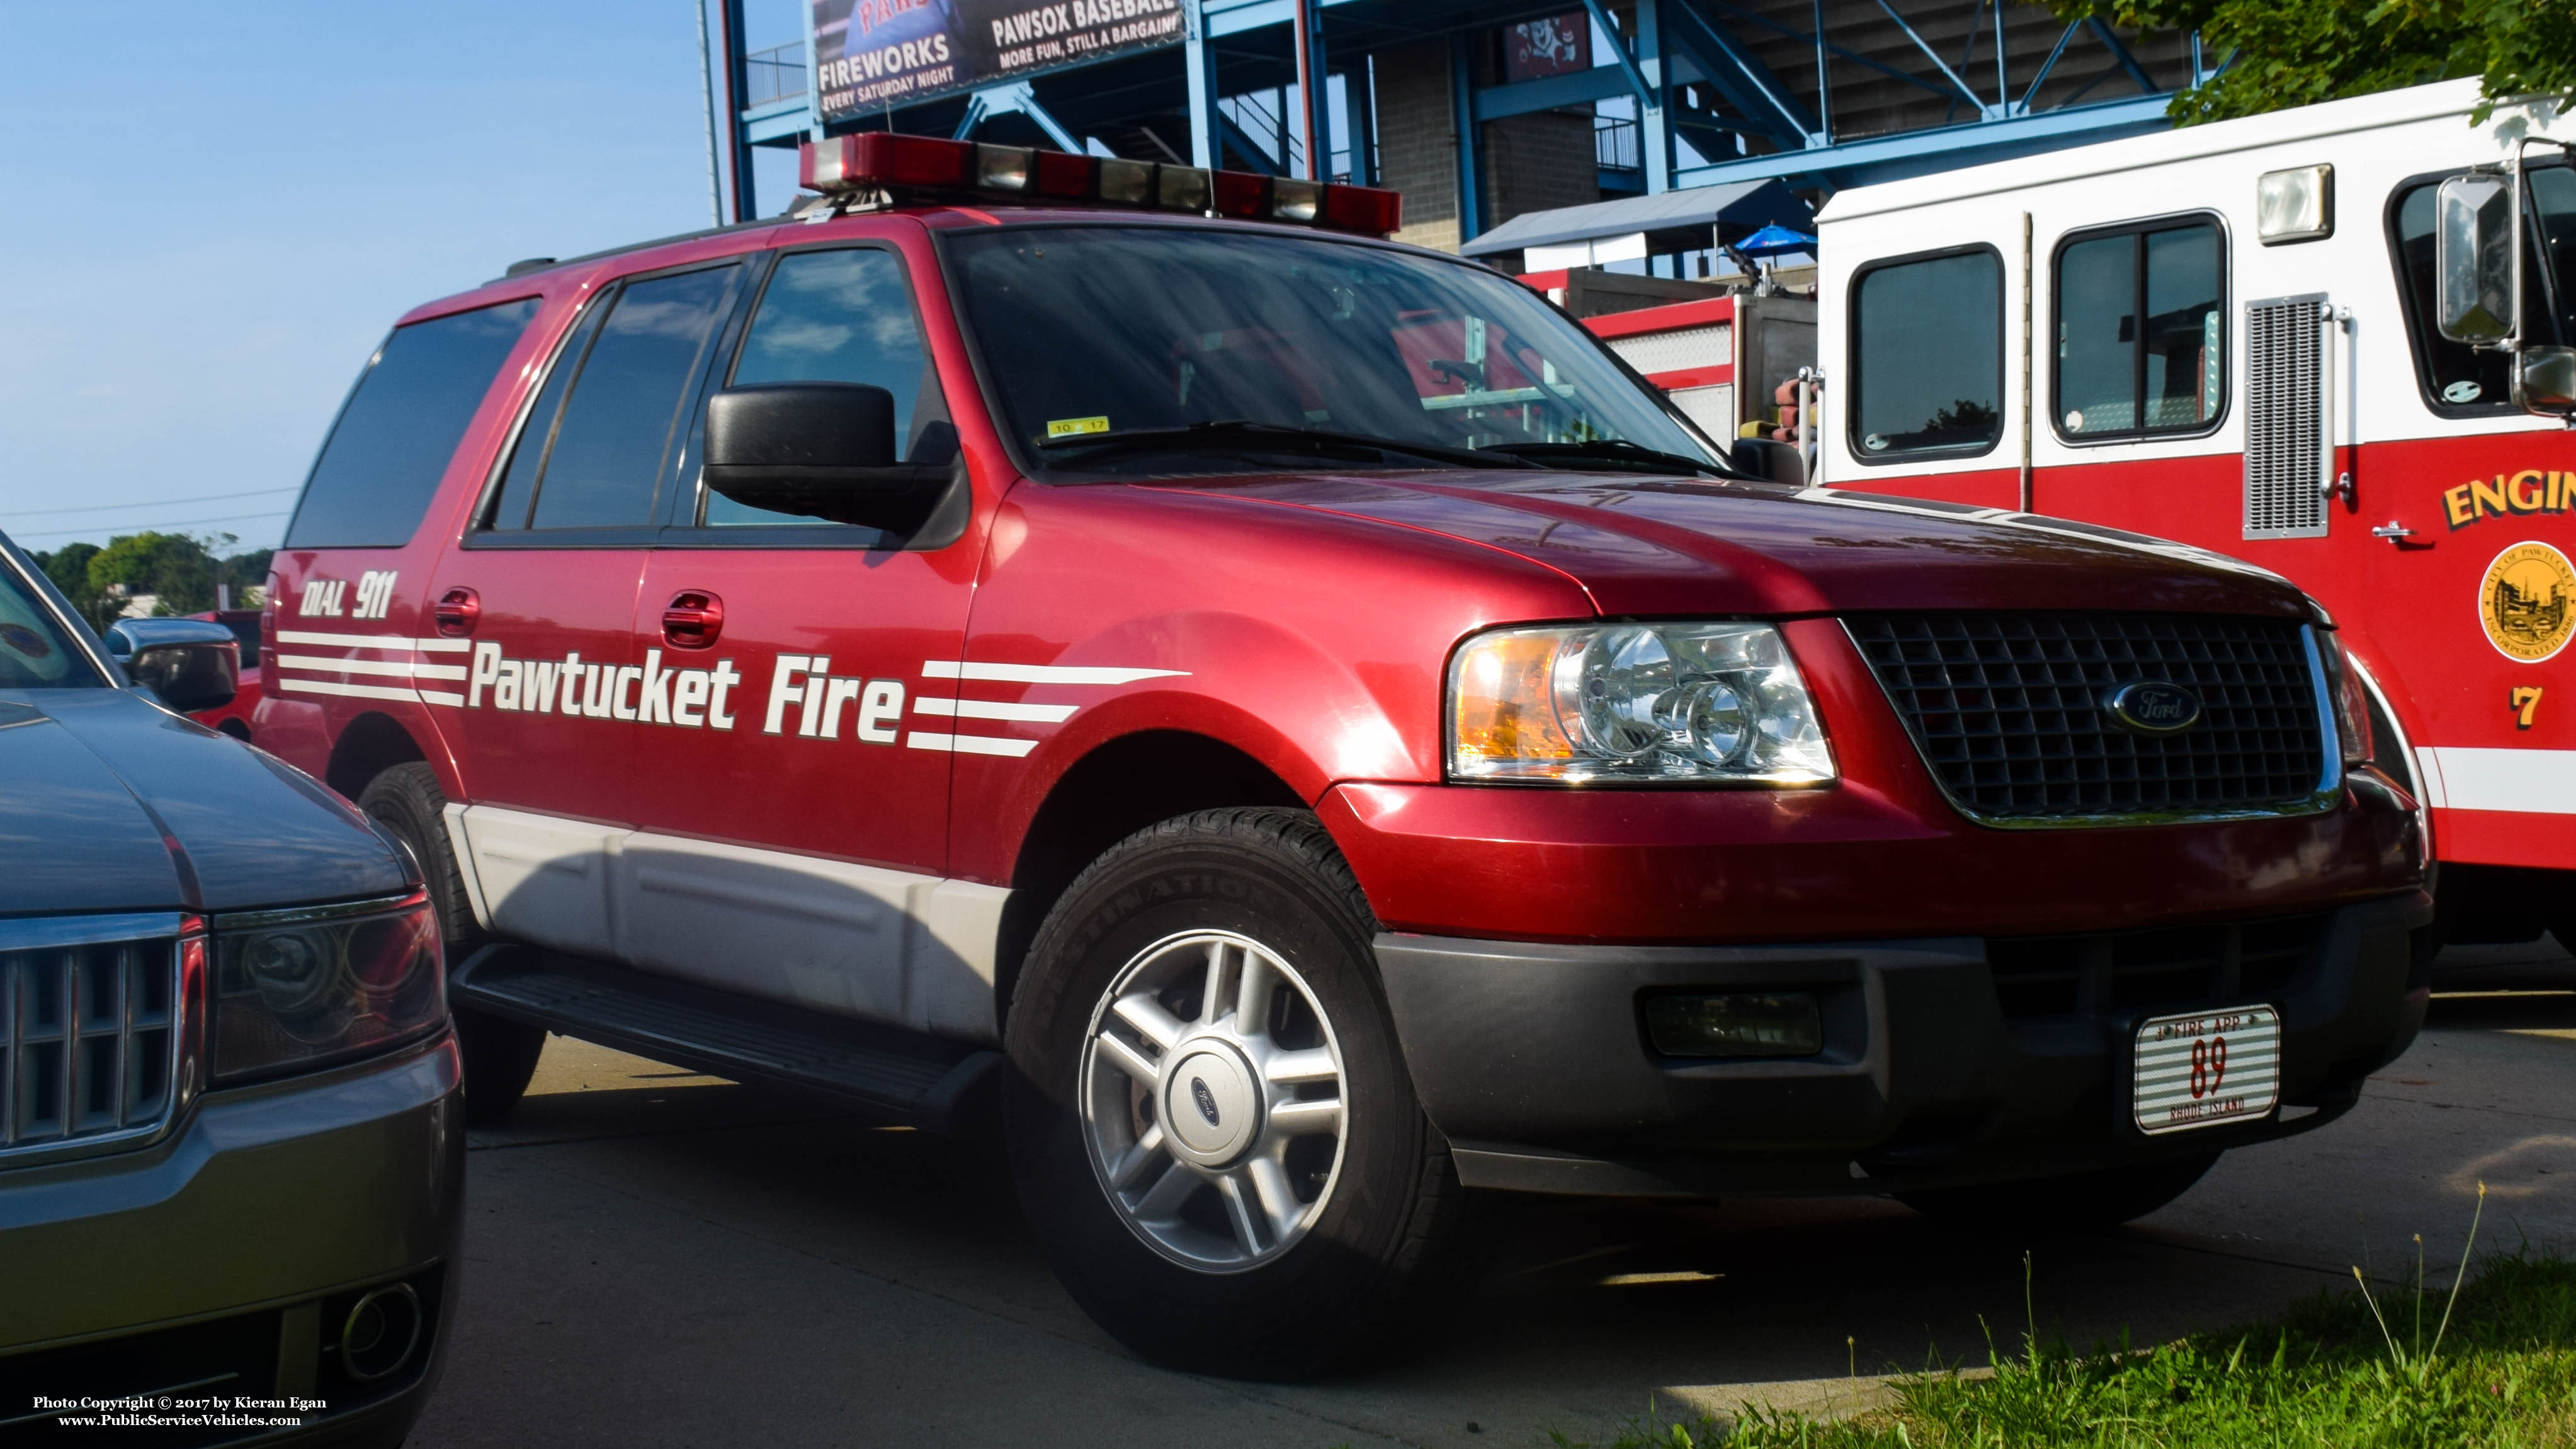 A photo  of Pawtucket Fire
            Spare Car, a 2003-2006 Ford Expedition             taken by Kieran Egan